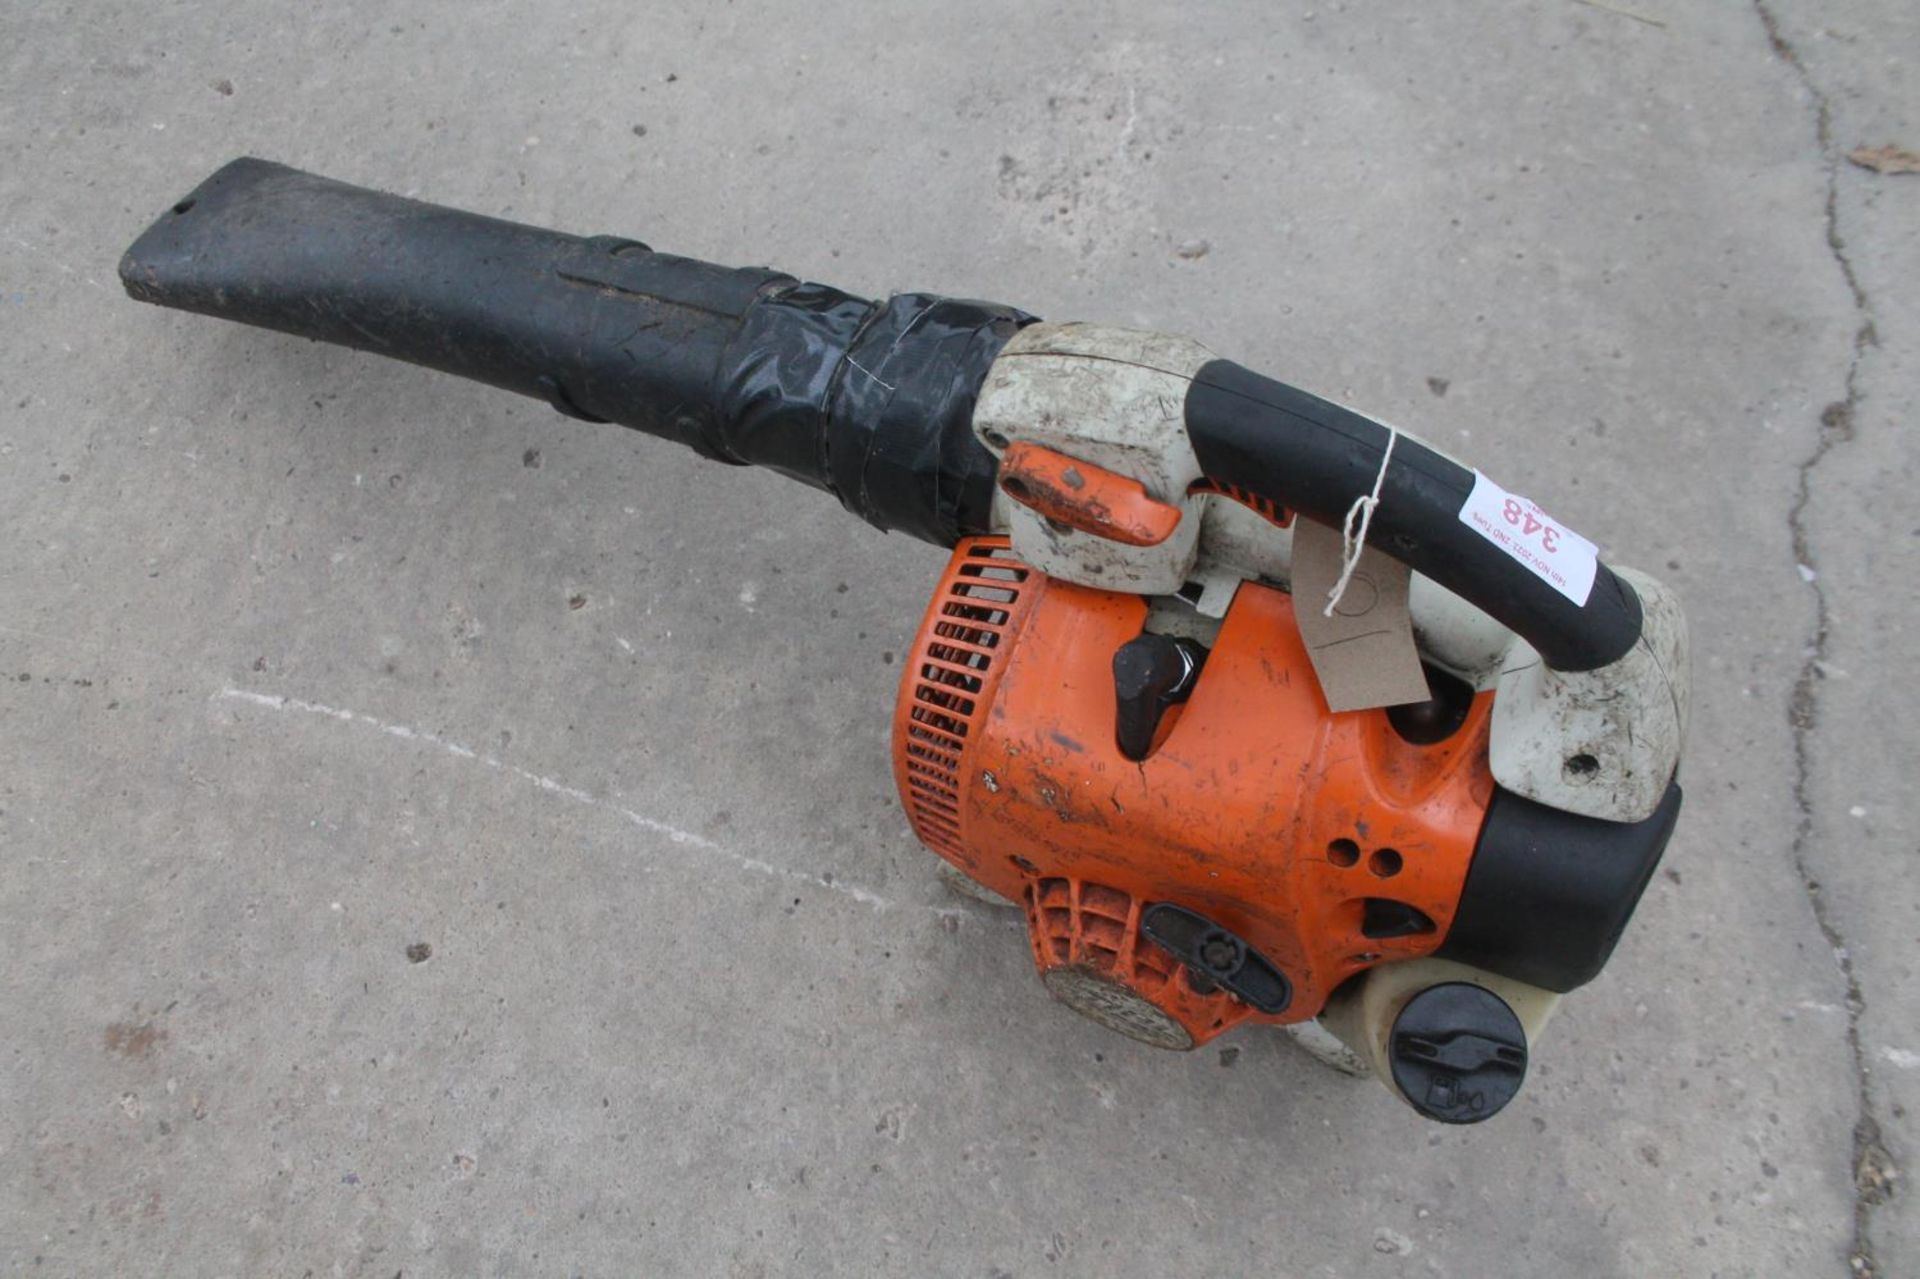 STHIL HAND HELD LEAF BLOWER NO VAT FROM A RETIREMENT DISPERSAL - Image 2 of 2